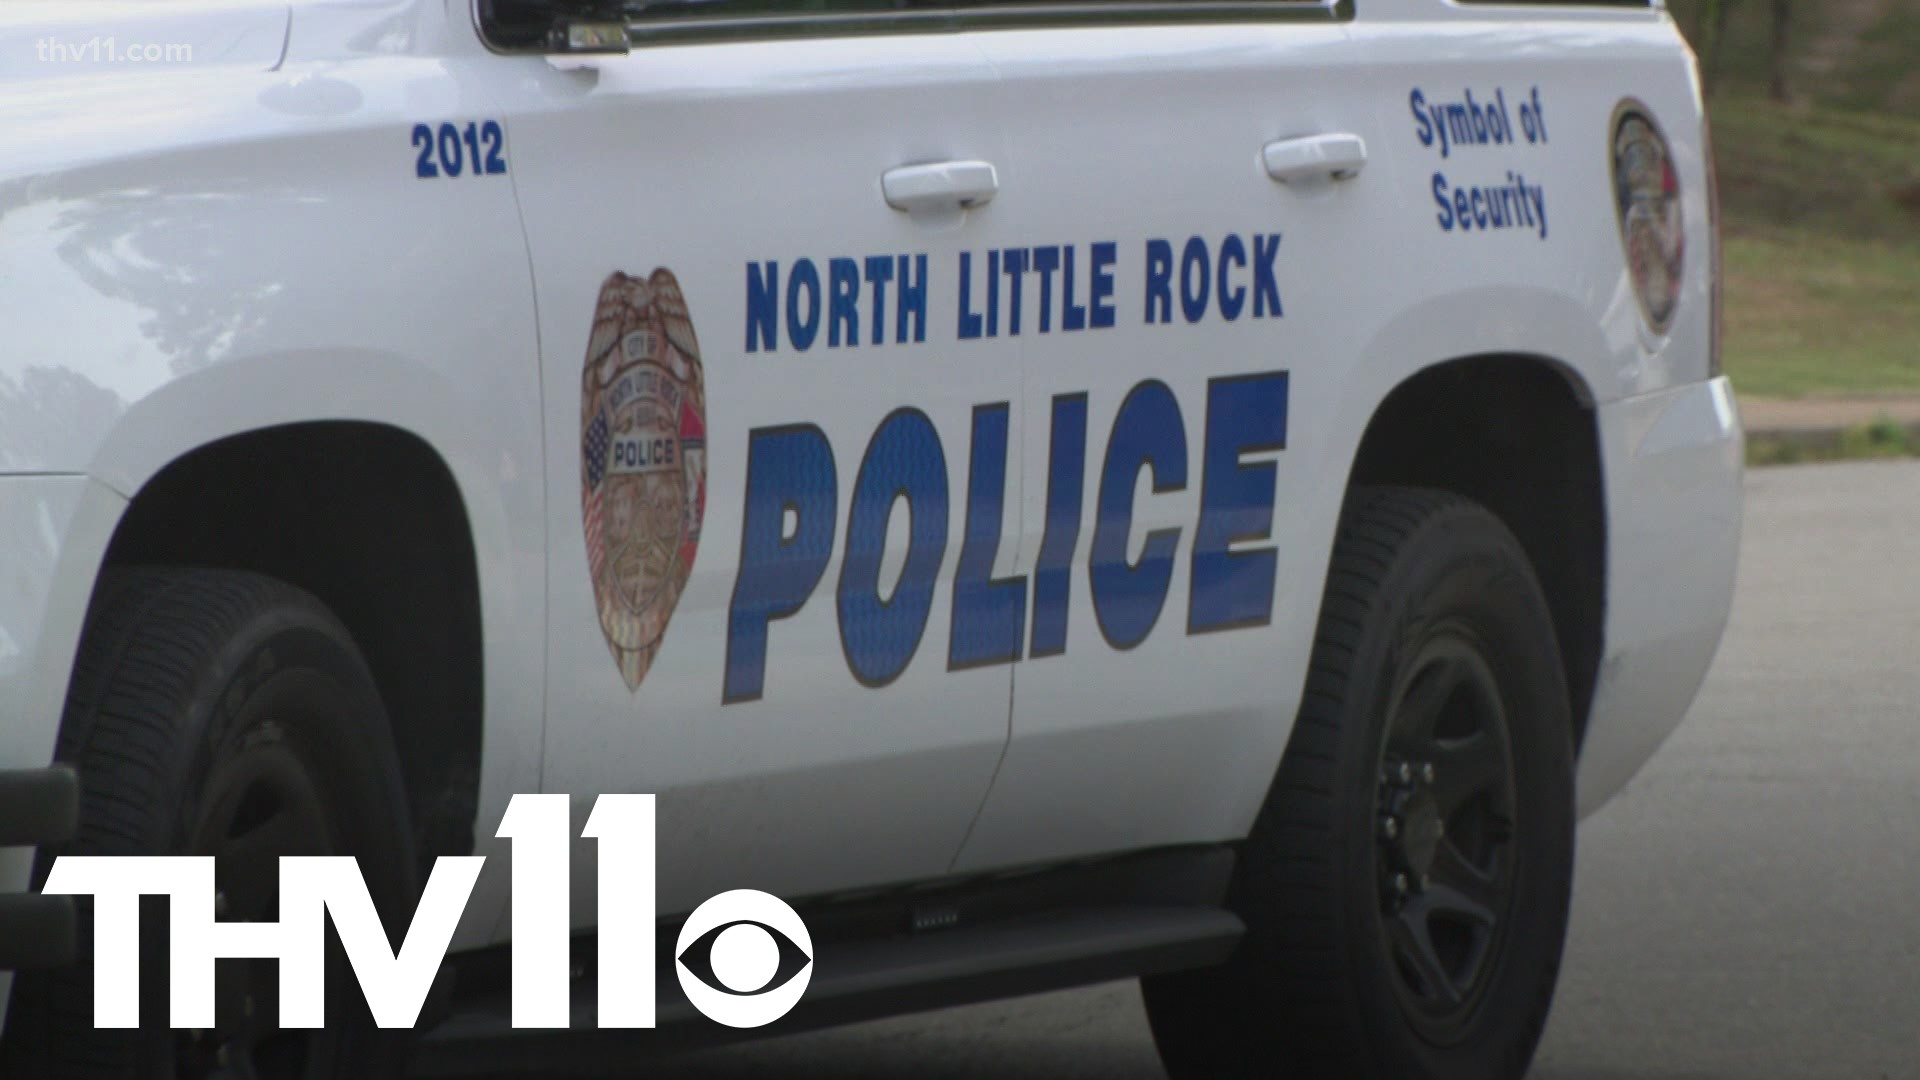 The North Little Rock Police Department is investigating a shooting incident that left one victim injured on Sunday morning.